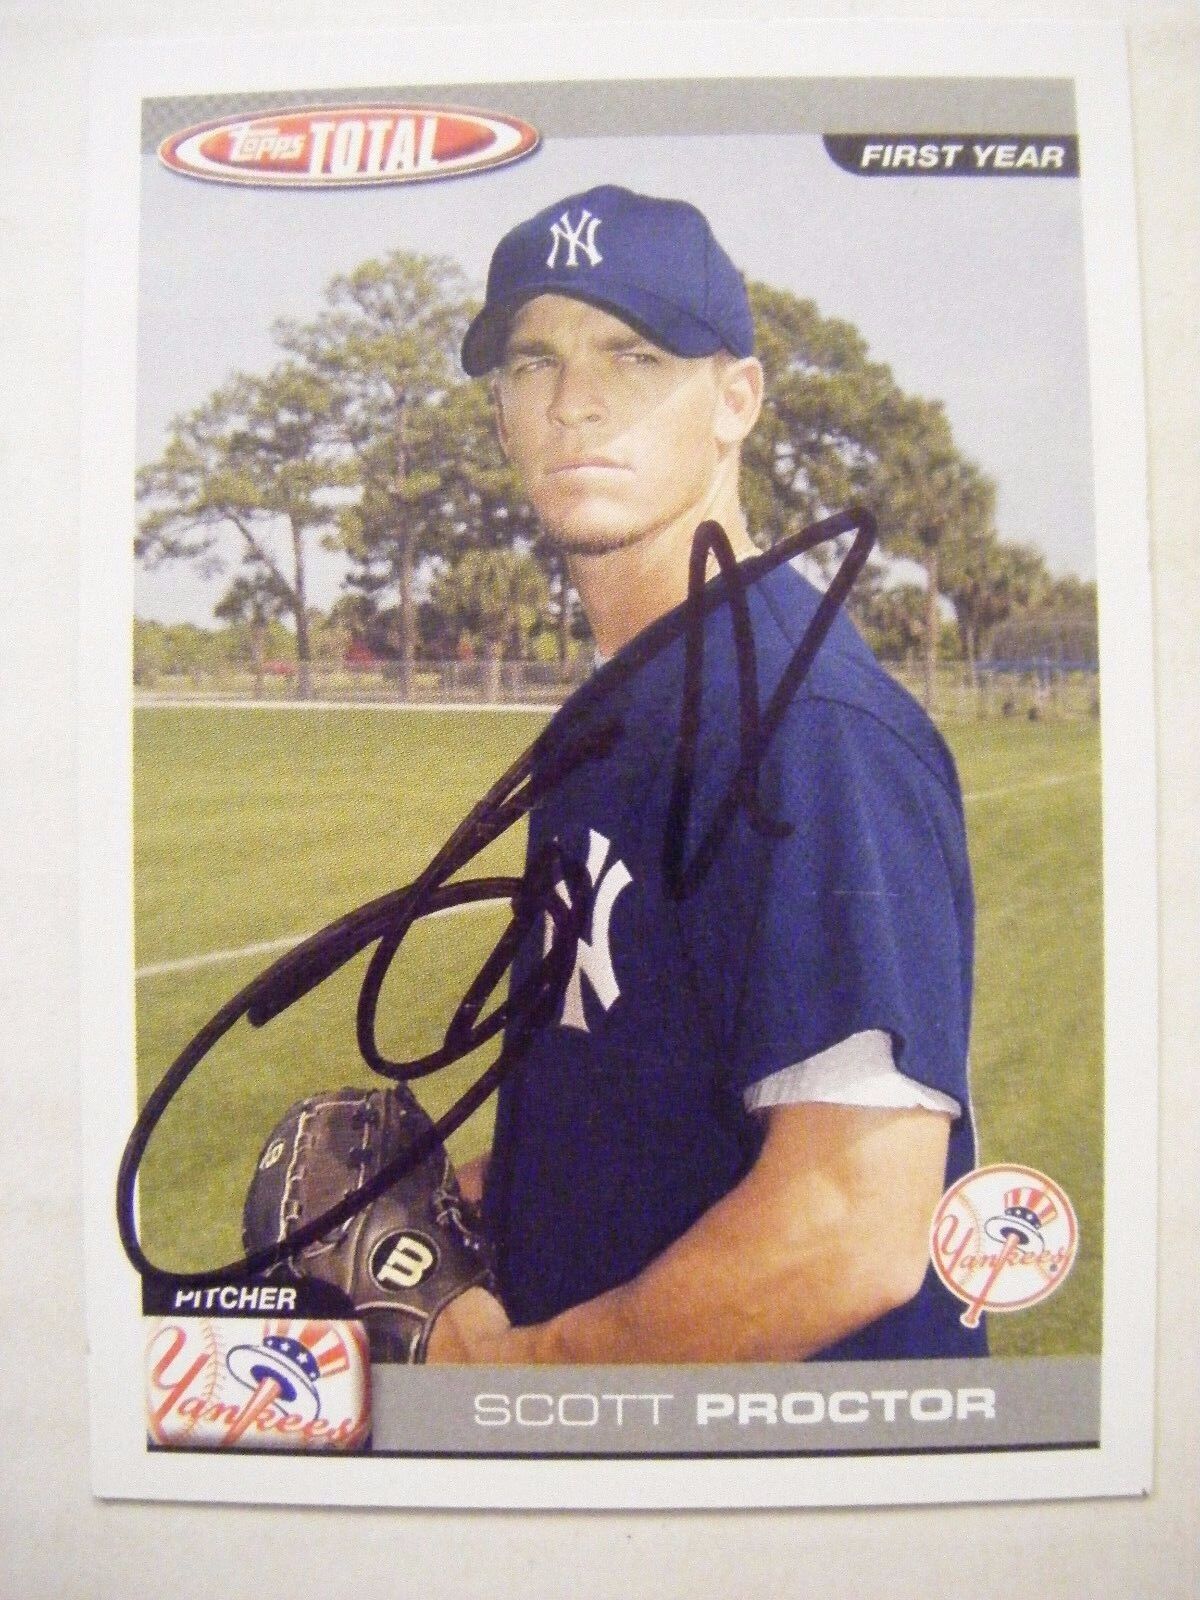 SCOTT PROCTOR signed YANKEES 2004 Topps Total baseball card AUTO Autographed 867